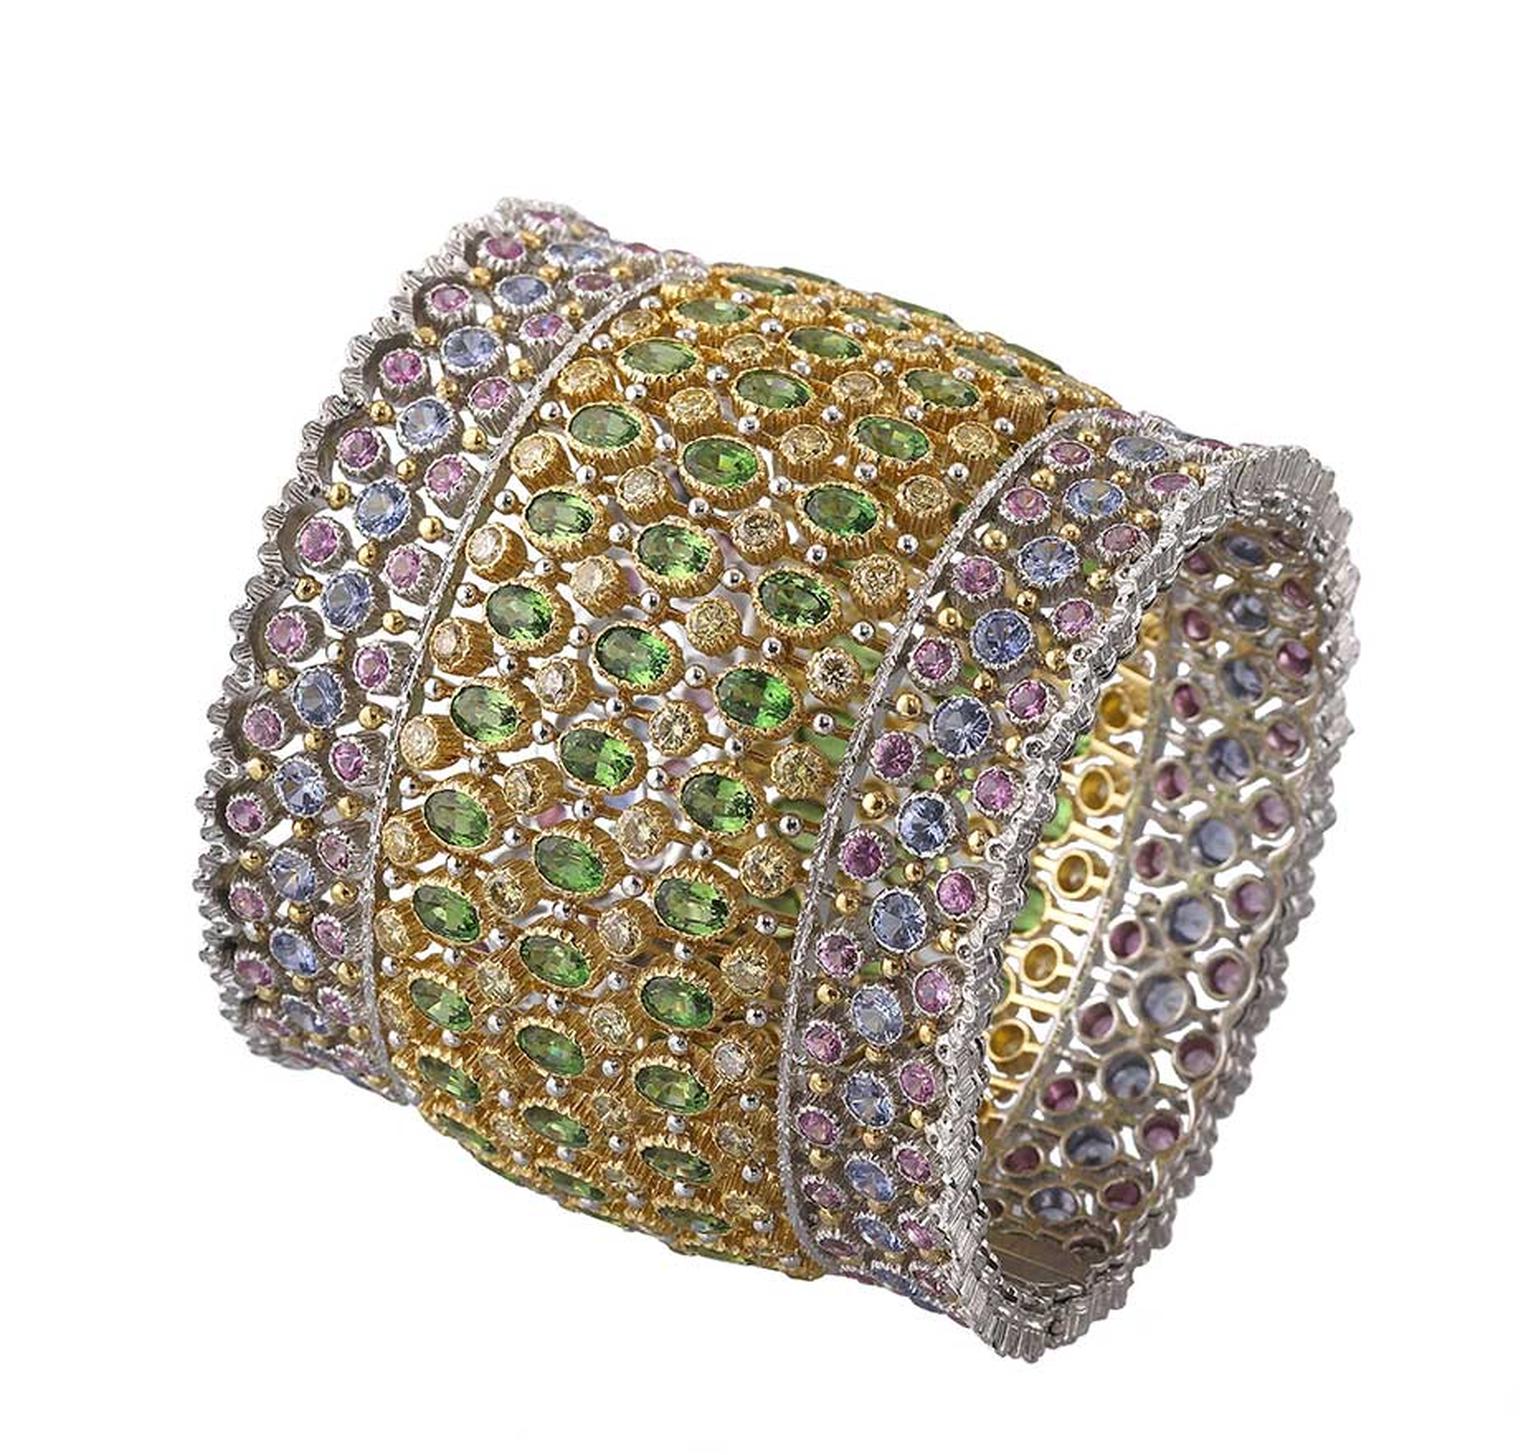 Buccellati cuff bracelet with 51.41ct tsavorites, Fancy diamonds and blue and pink sapphires.